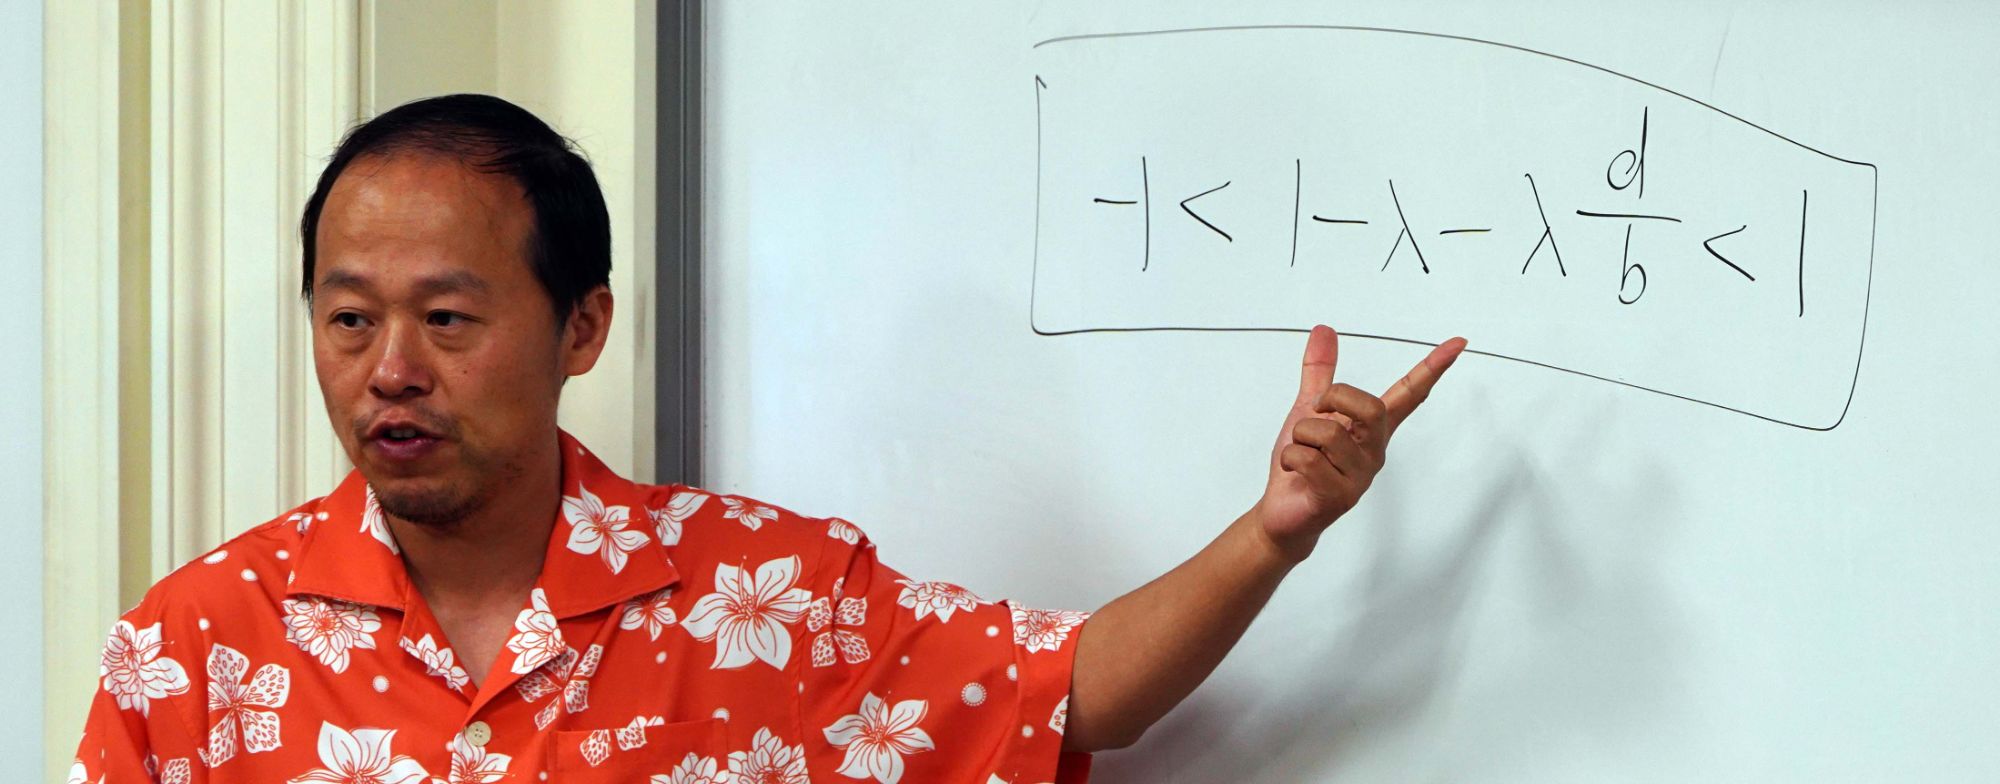  Jing Li points to equation on whiteboard